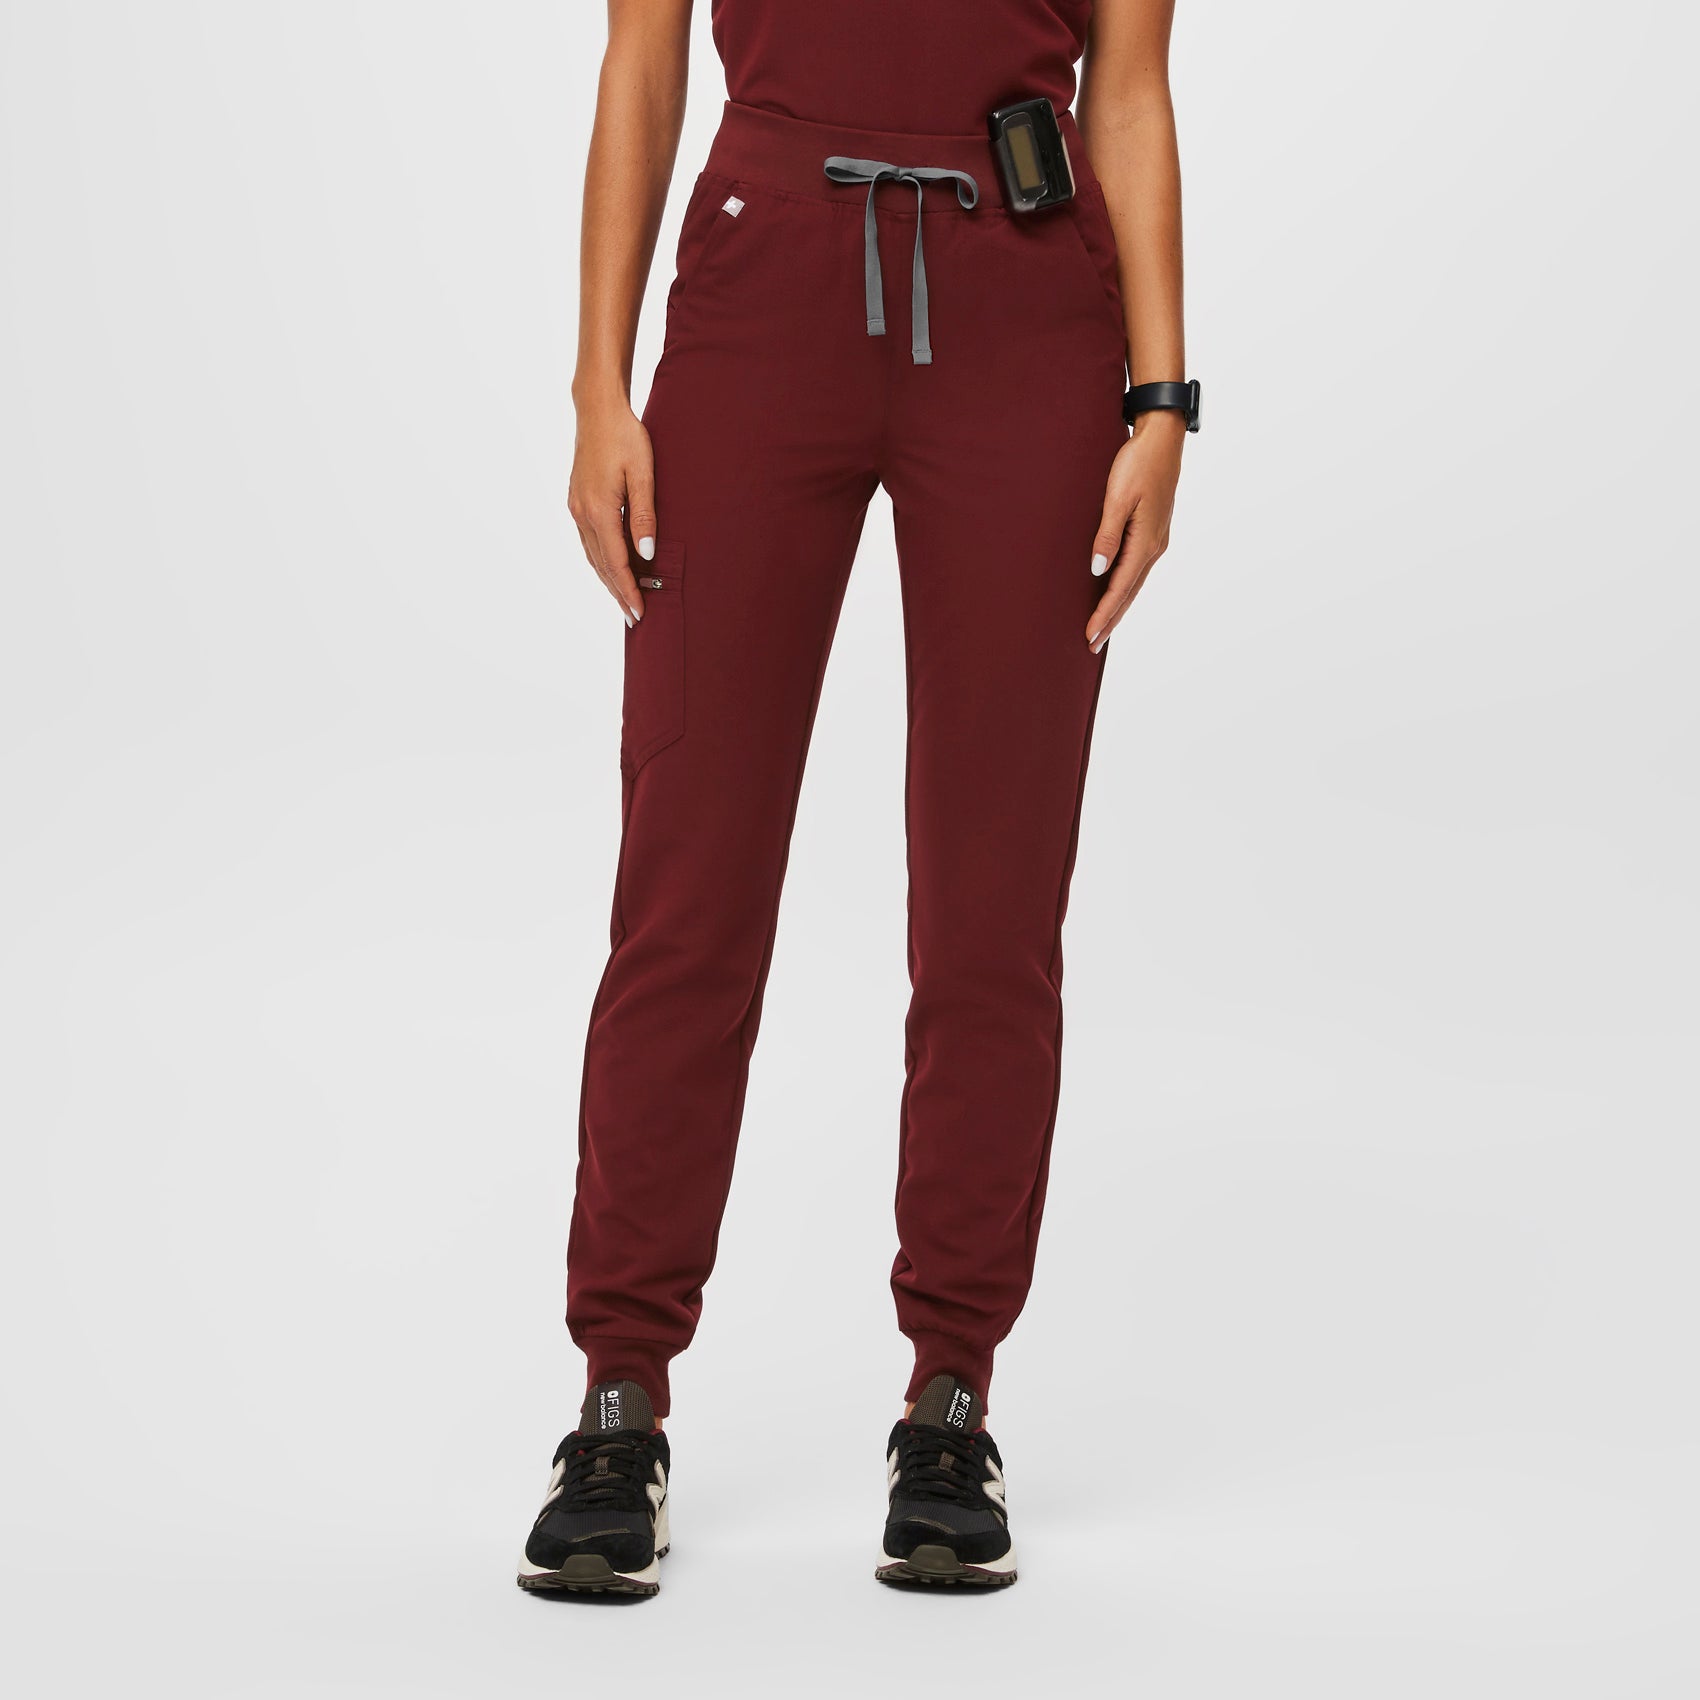 FIGS neon red high waisted jogger M/P - Athletic apparel